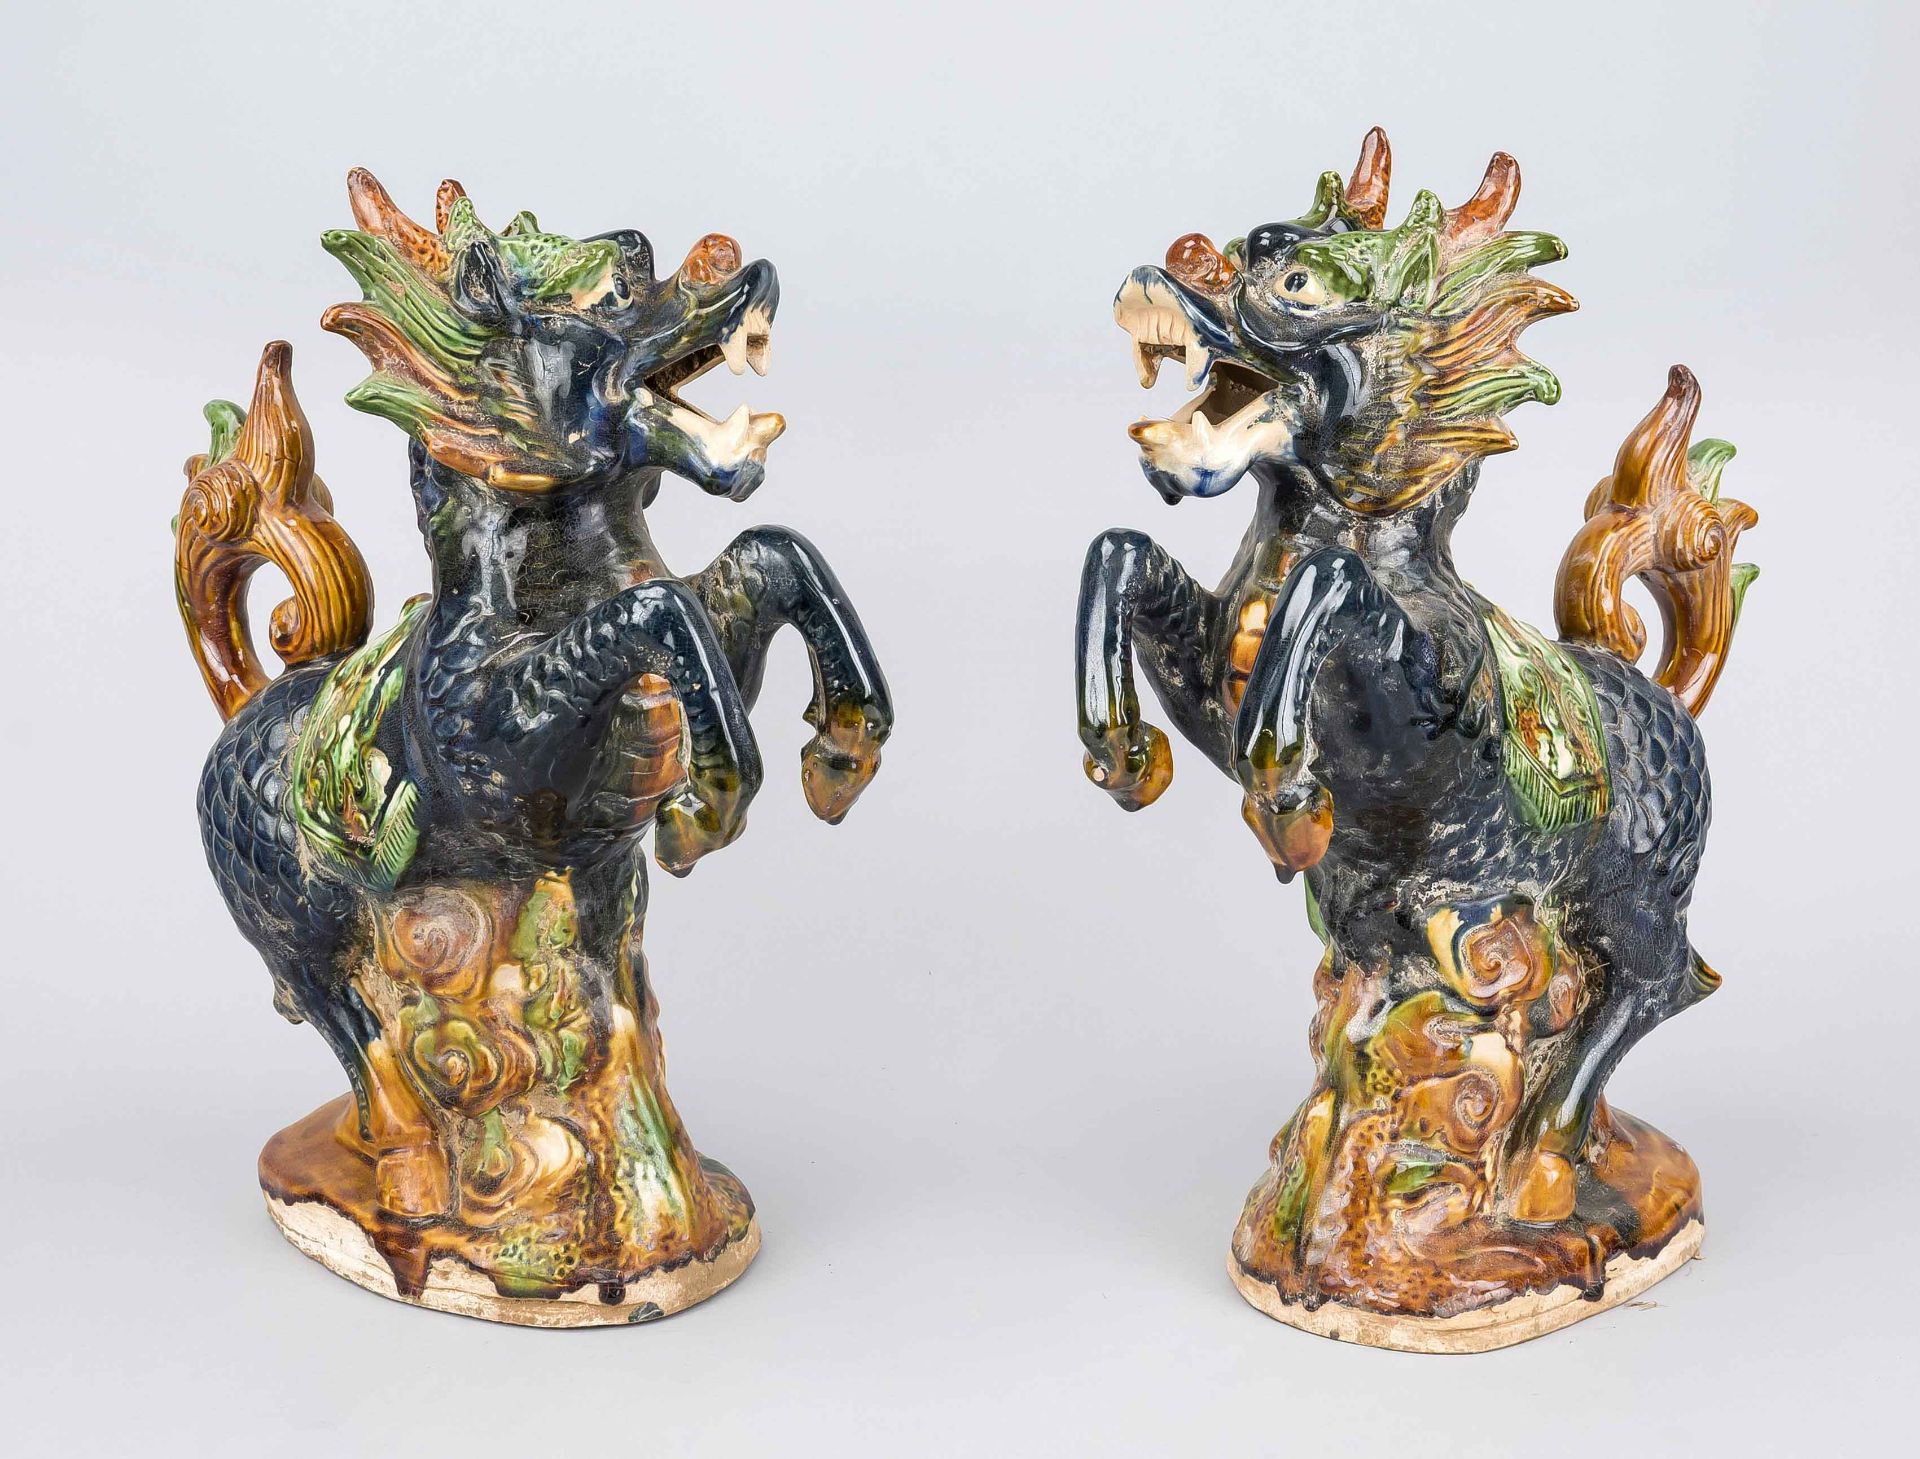 Pair of large guardian figures (dragon horses), China, probably Republic period. With a three-